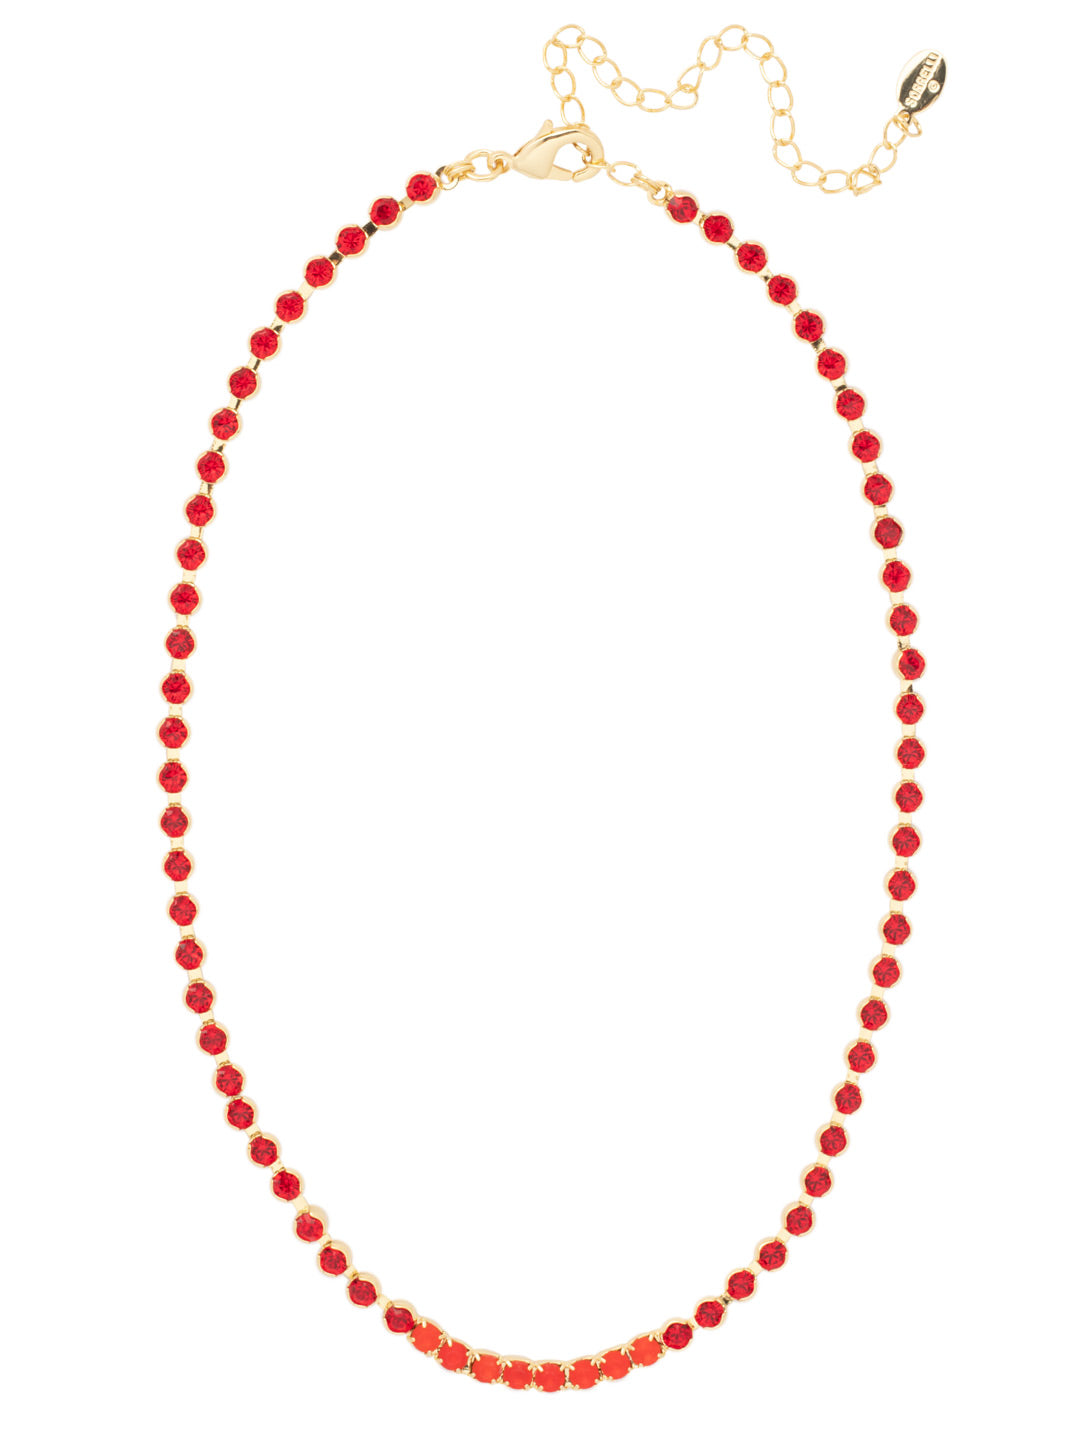 Marnie Tennis Necklace - NFA2BGFIS - <p>Perfect for dressing up or down, the classic Marnie Tennis Necklace features a repeating line of crystals secured by a lobster claw clasp. From Sorrelli's Fireside collection in our Bright Gold-tone finish.</p>